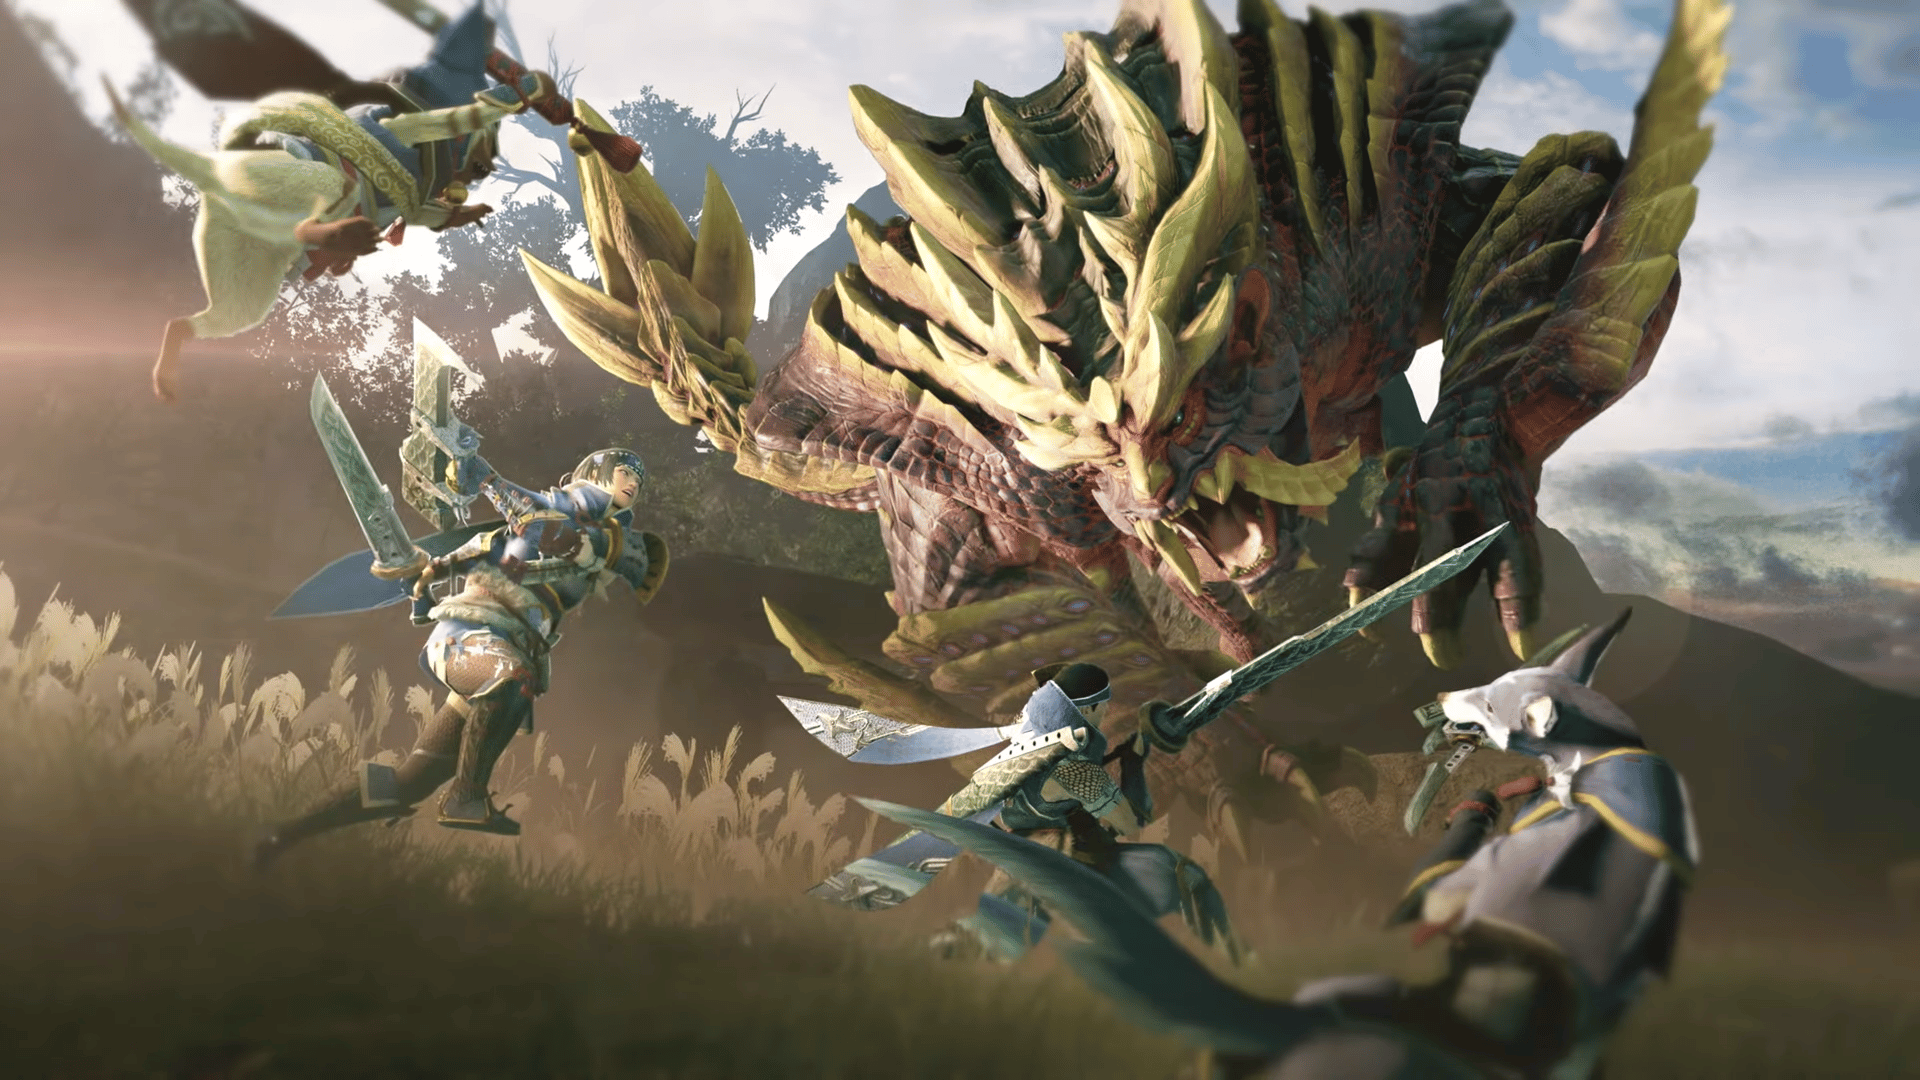 Capcom will not add cross-play or cross-saves to Monster Hunter: Rise